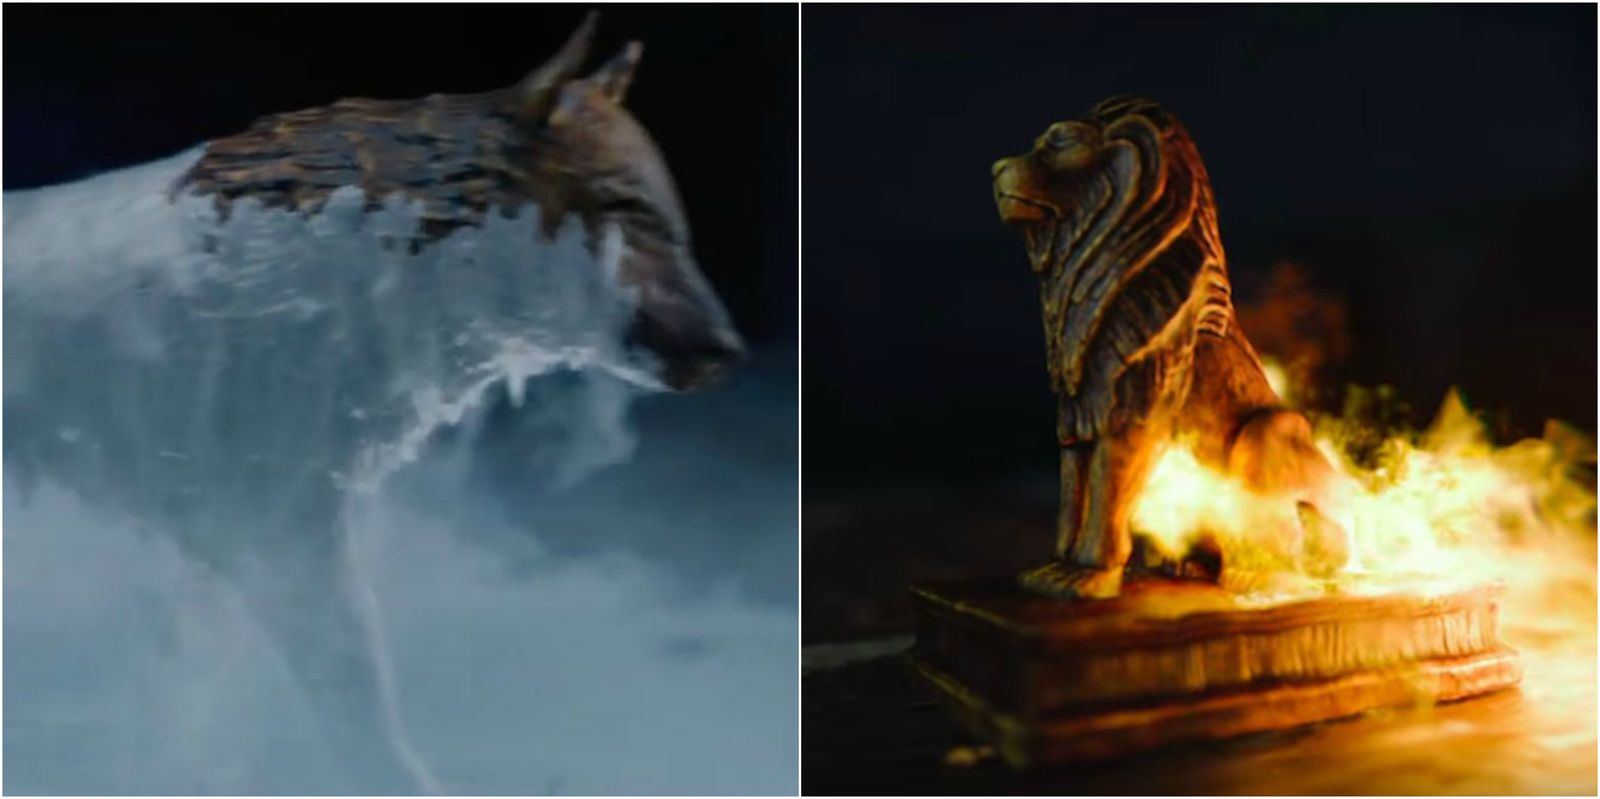 These Are Some Of Our Predictions After Watching The Game Of Thrones Season 8 Teaser